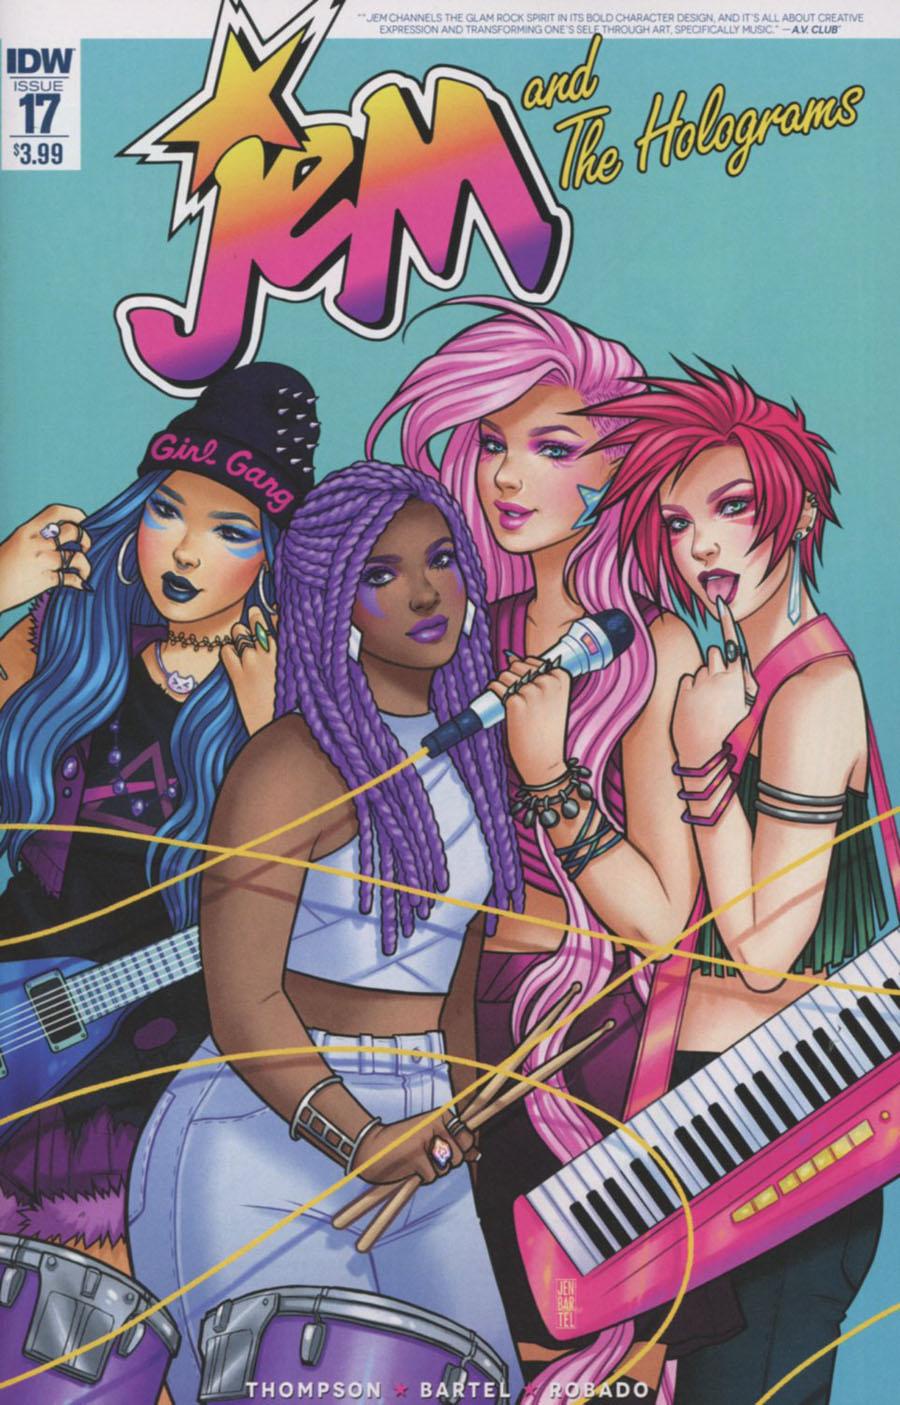 Jem And The Holograms Vol. 1 #17